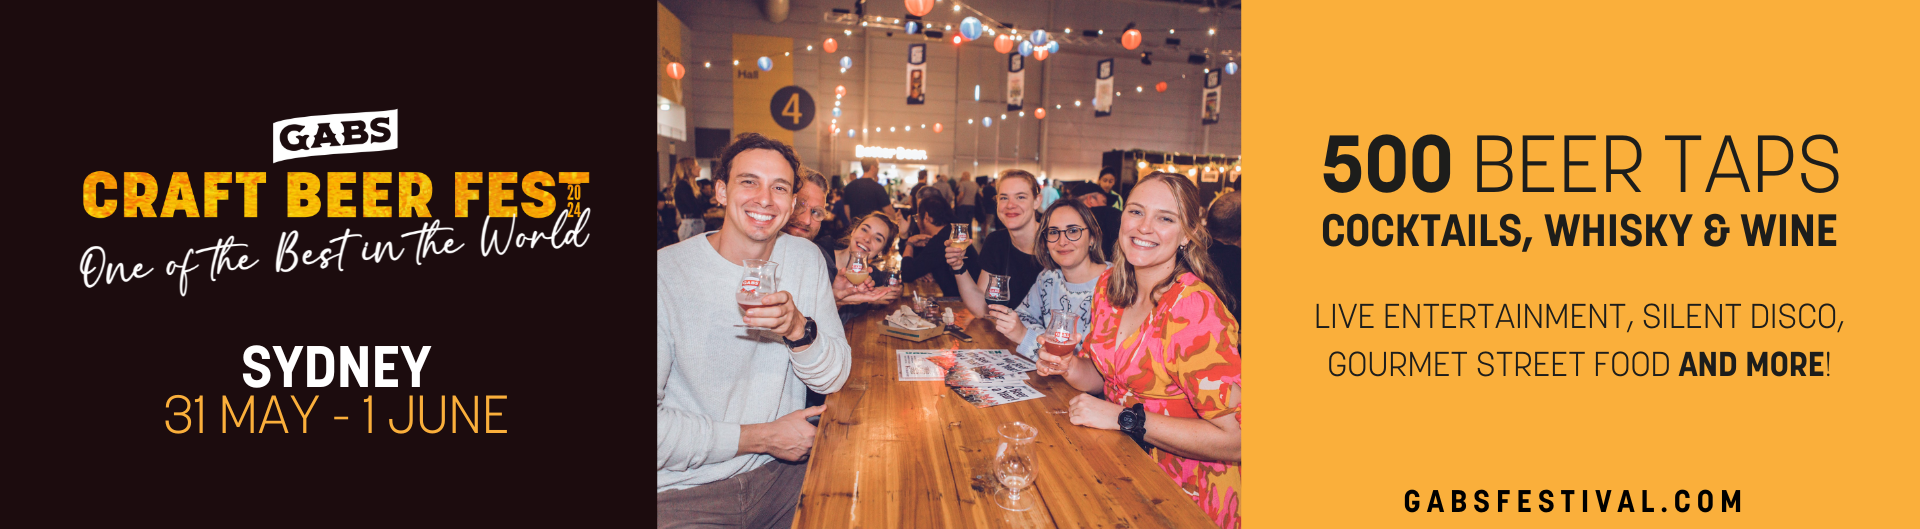 GABS Craft Beer Festival - Sydney is coming to ICC Sydney on 31 May to 1 June 2024.